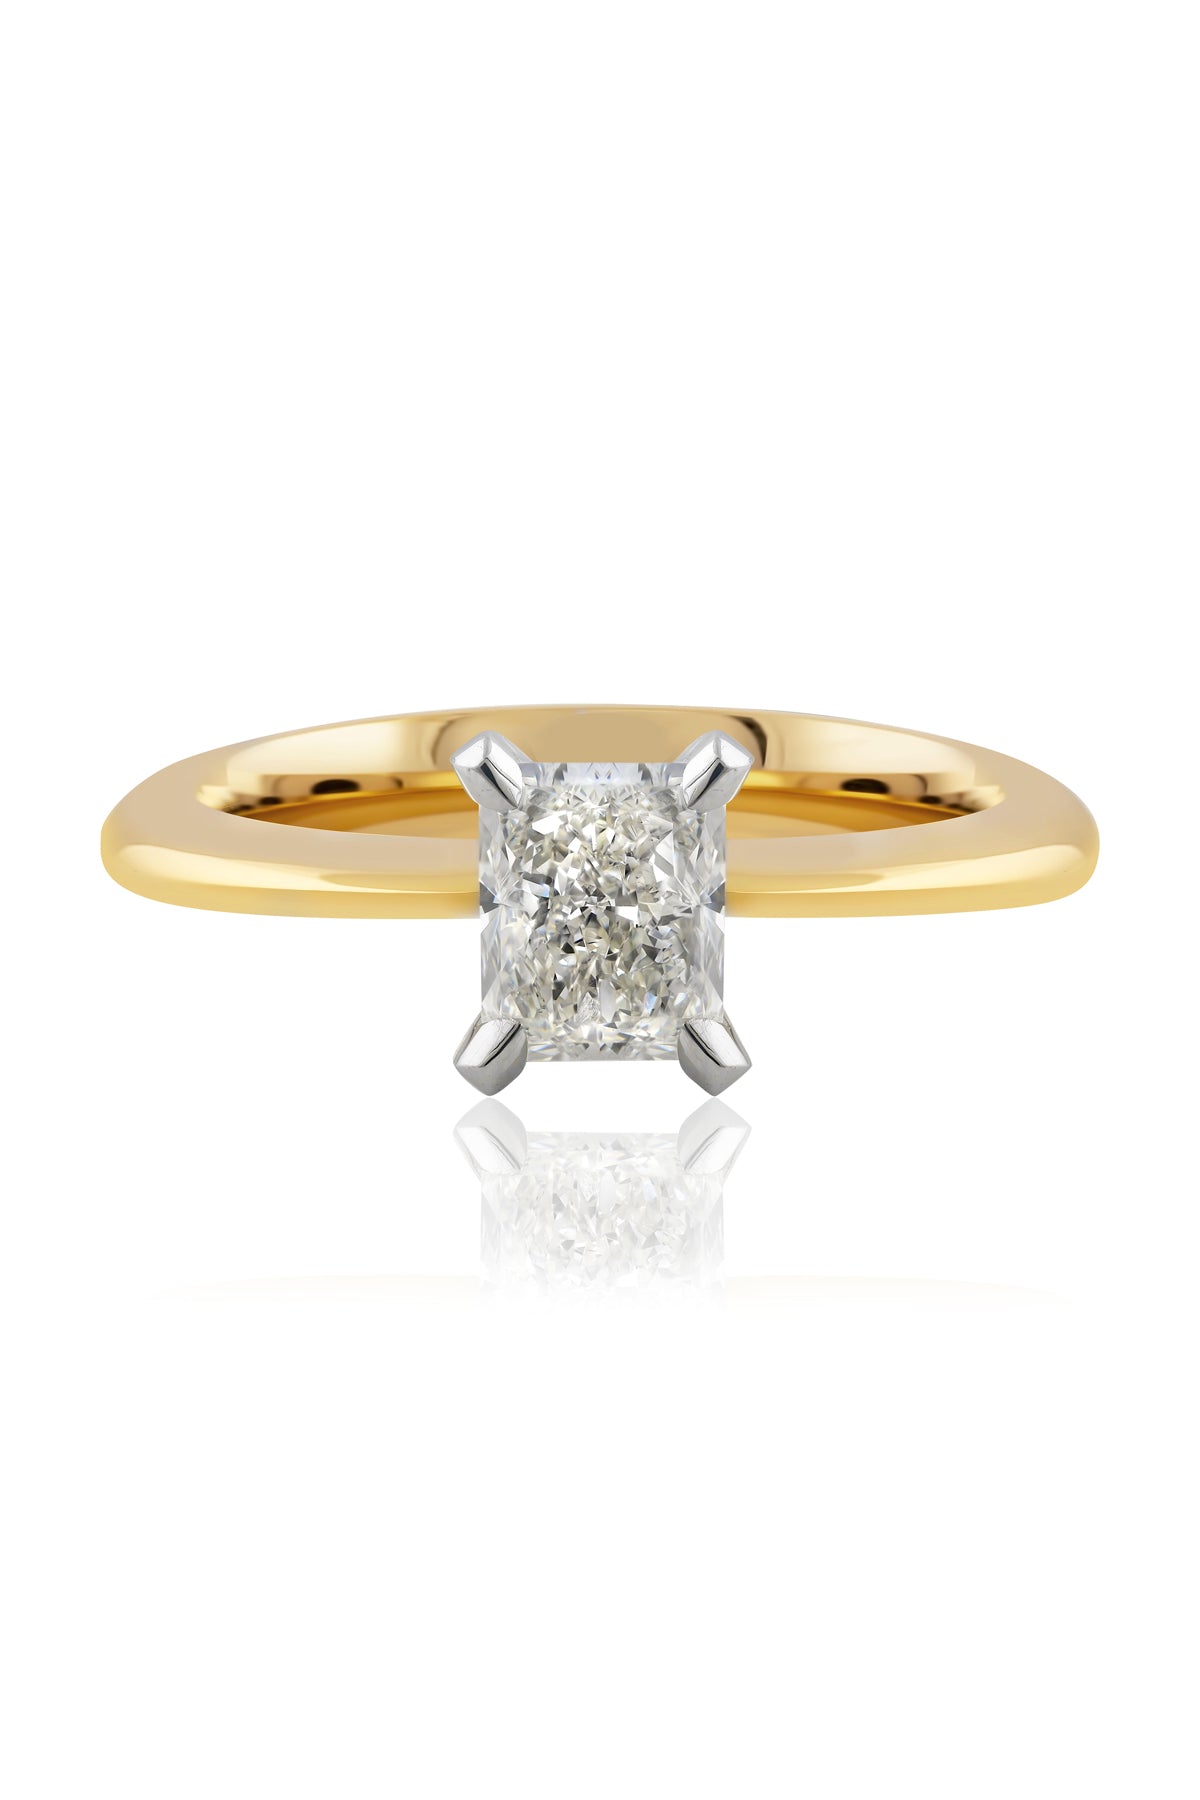 1 Carat Radiant Cut Diamond Engagement Ring In Yellow & White Gold from LeGassick Jewellers.